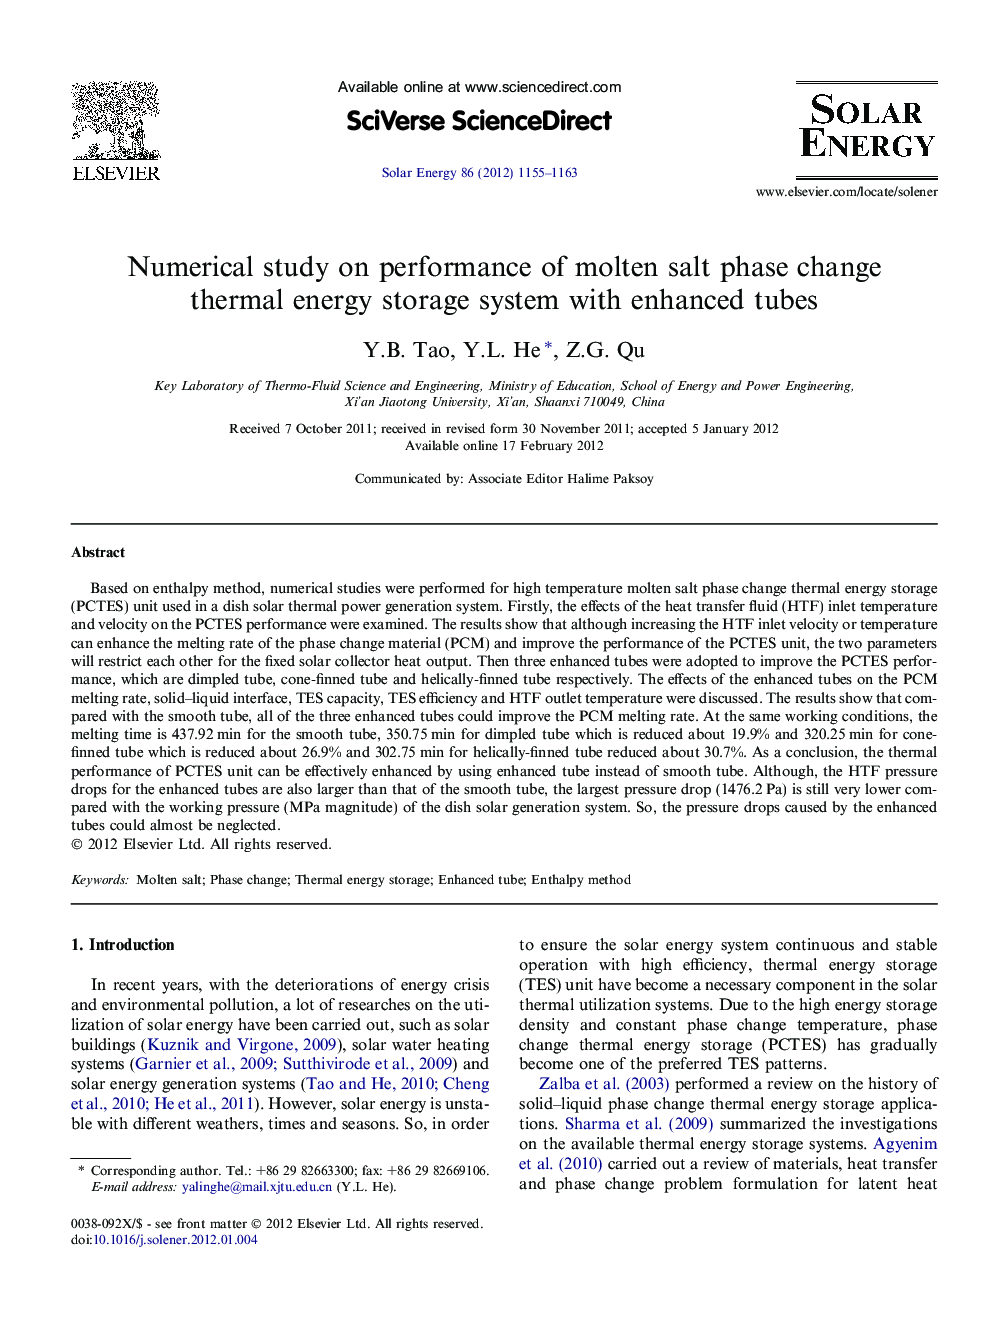 Numerical study on performance of molten salt phase change thermal energy storage system with enhanced tubes